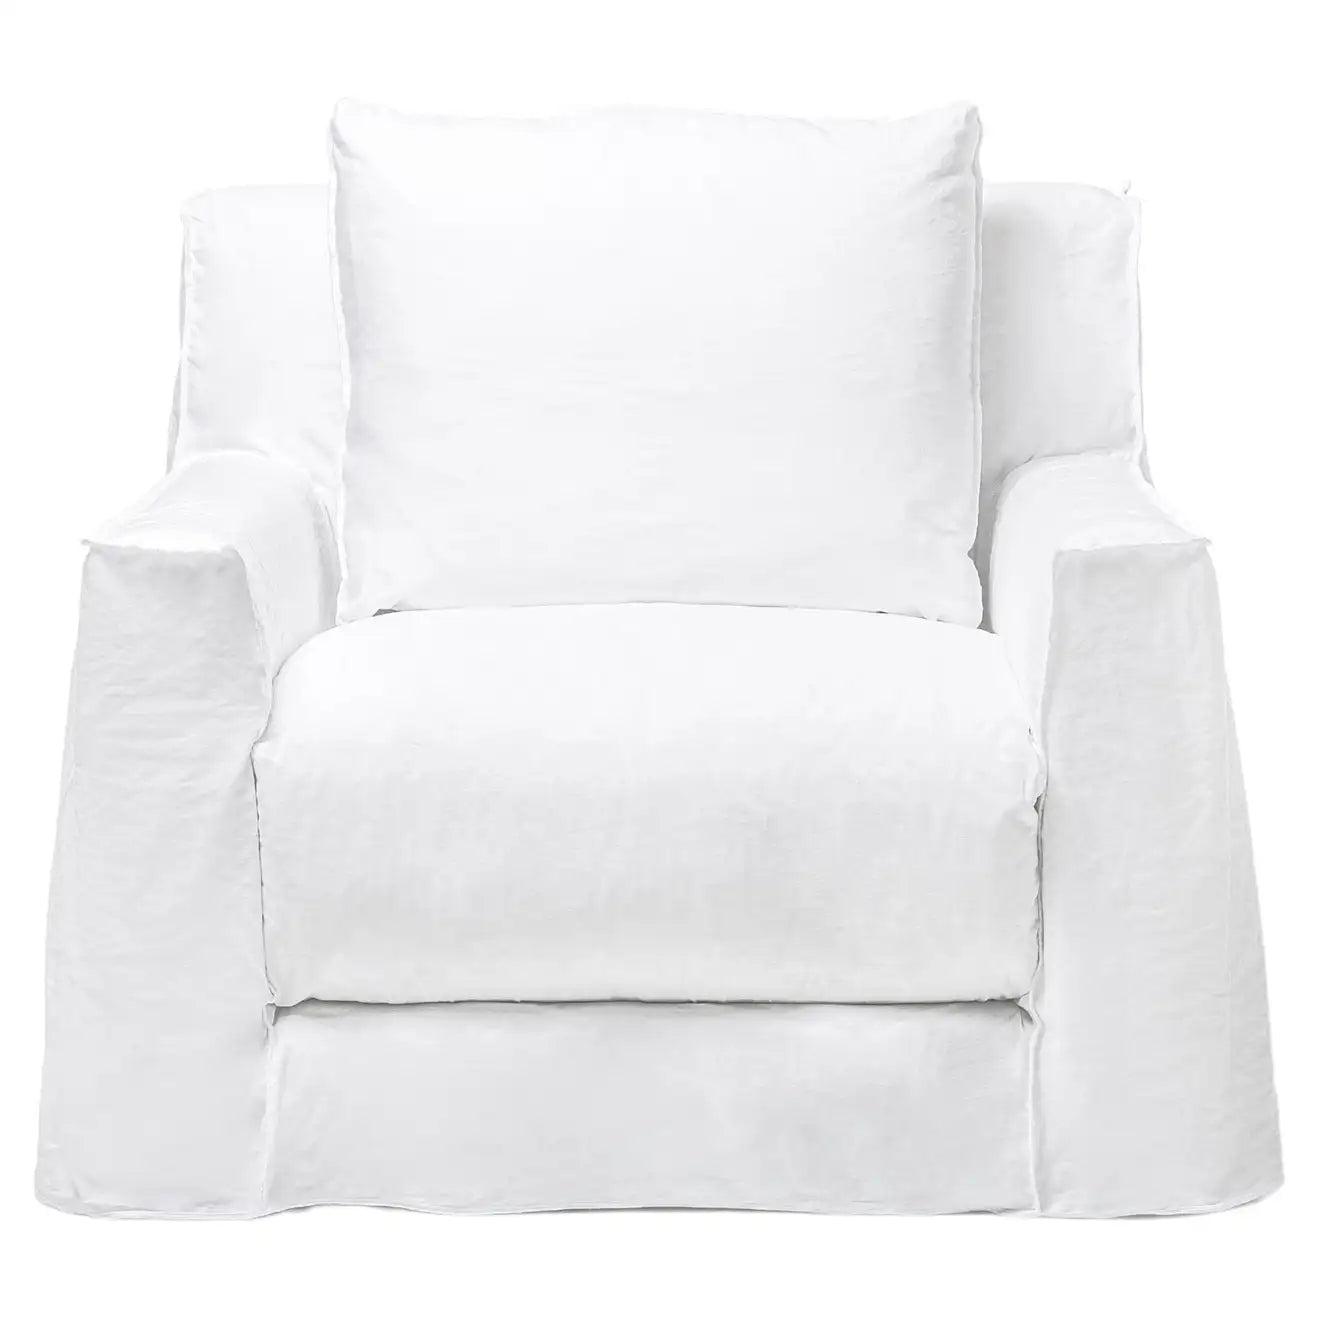 Gervasoni Loll 01 Armchair in White Linen Upholstery by Paola Navone - $3,695.00